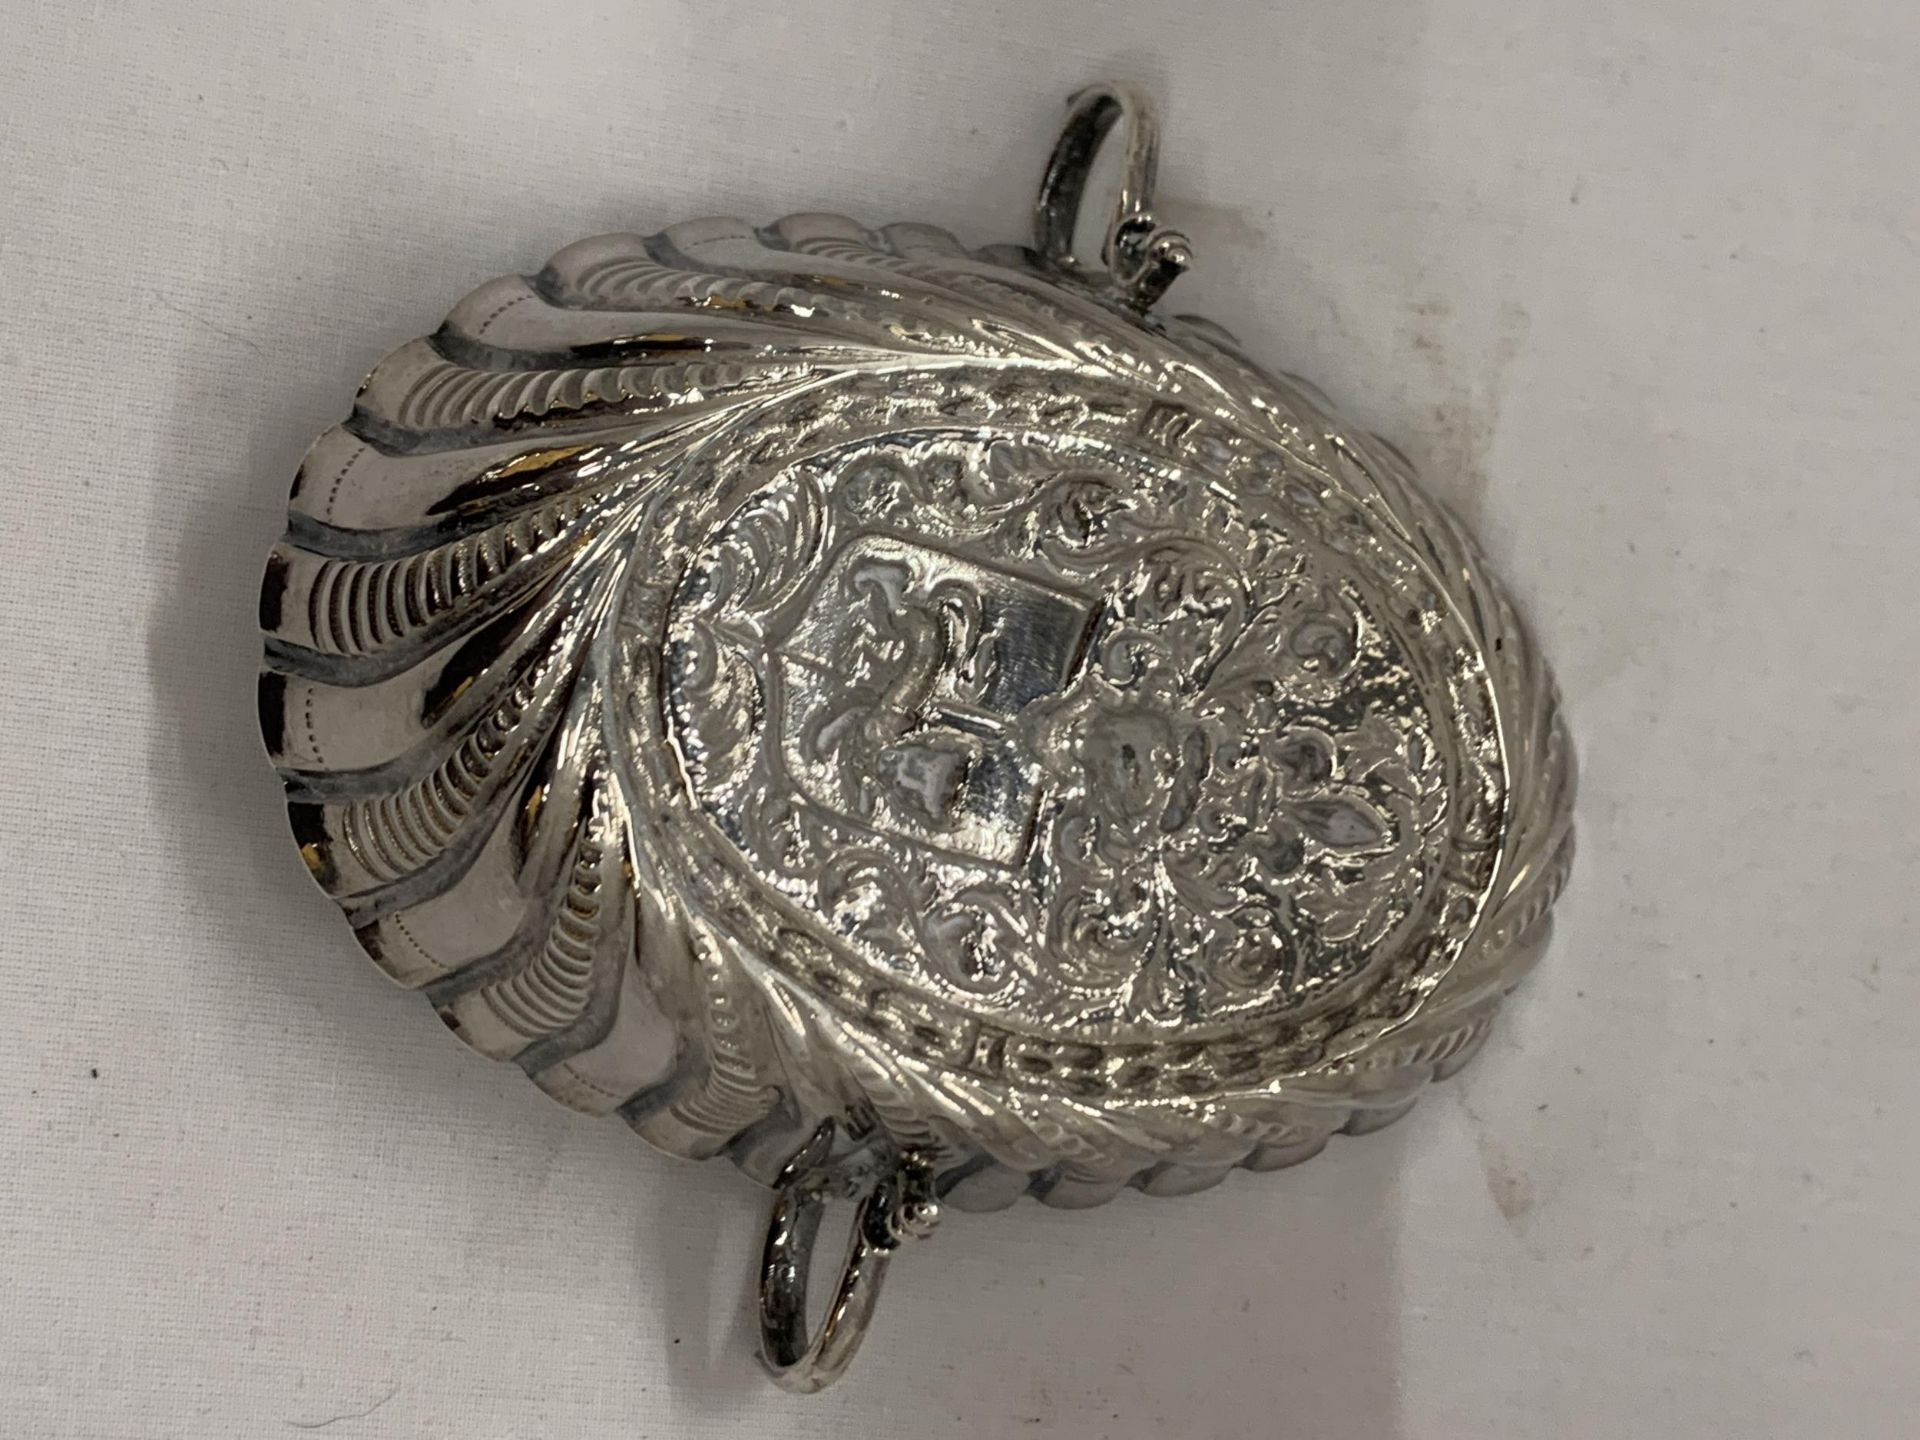 A TWIN HANDLED SILVER BOWL WITH COAT OF ARMS DESIGN - Image 4 of 4